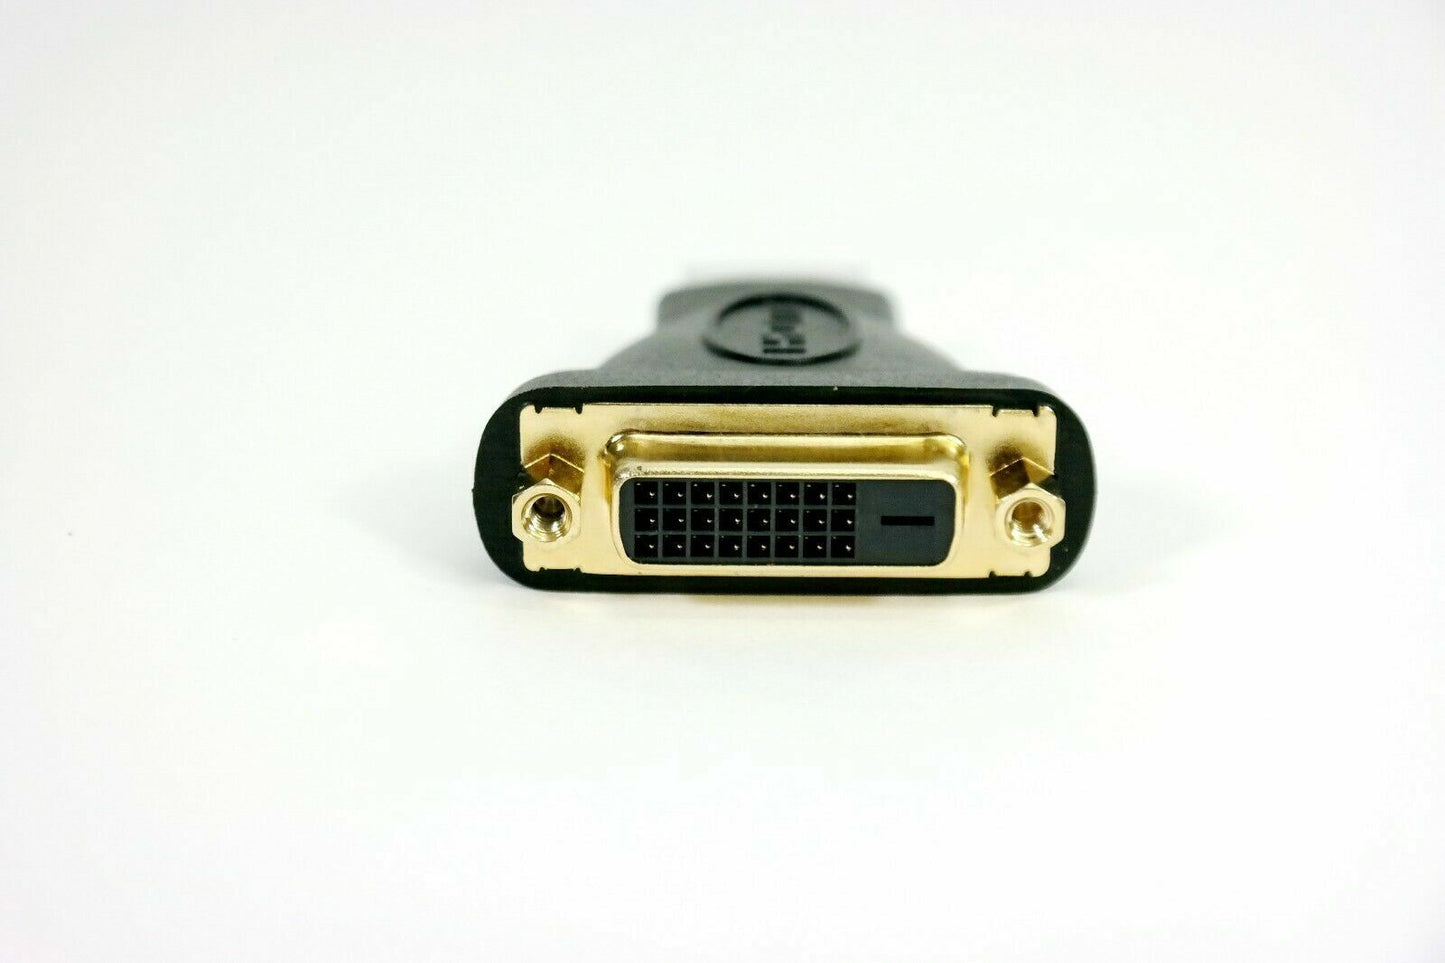 NEW Gold Tone DVI-D Dual Link 24+1 Female to HDMI Male Audio Video Adapter